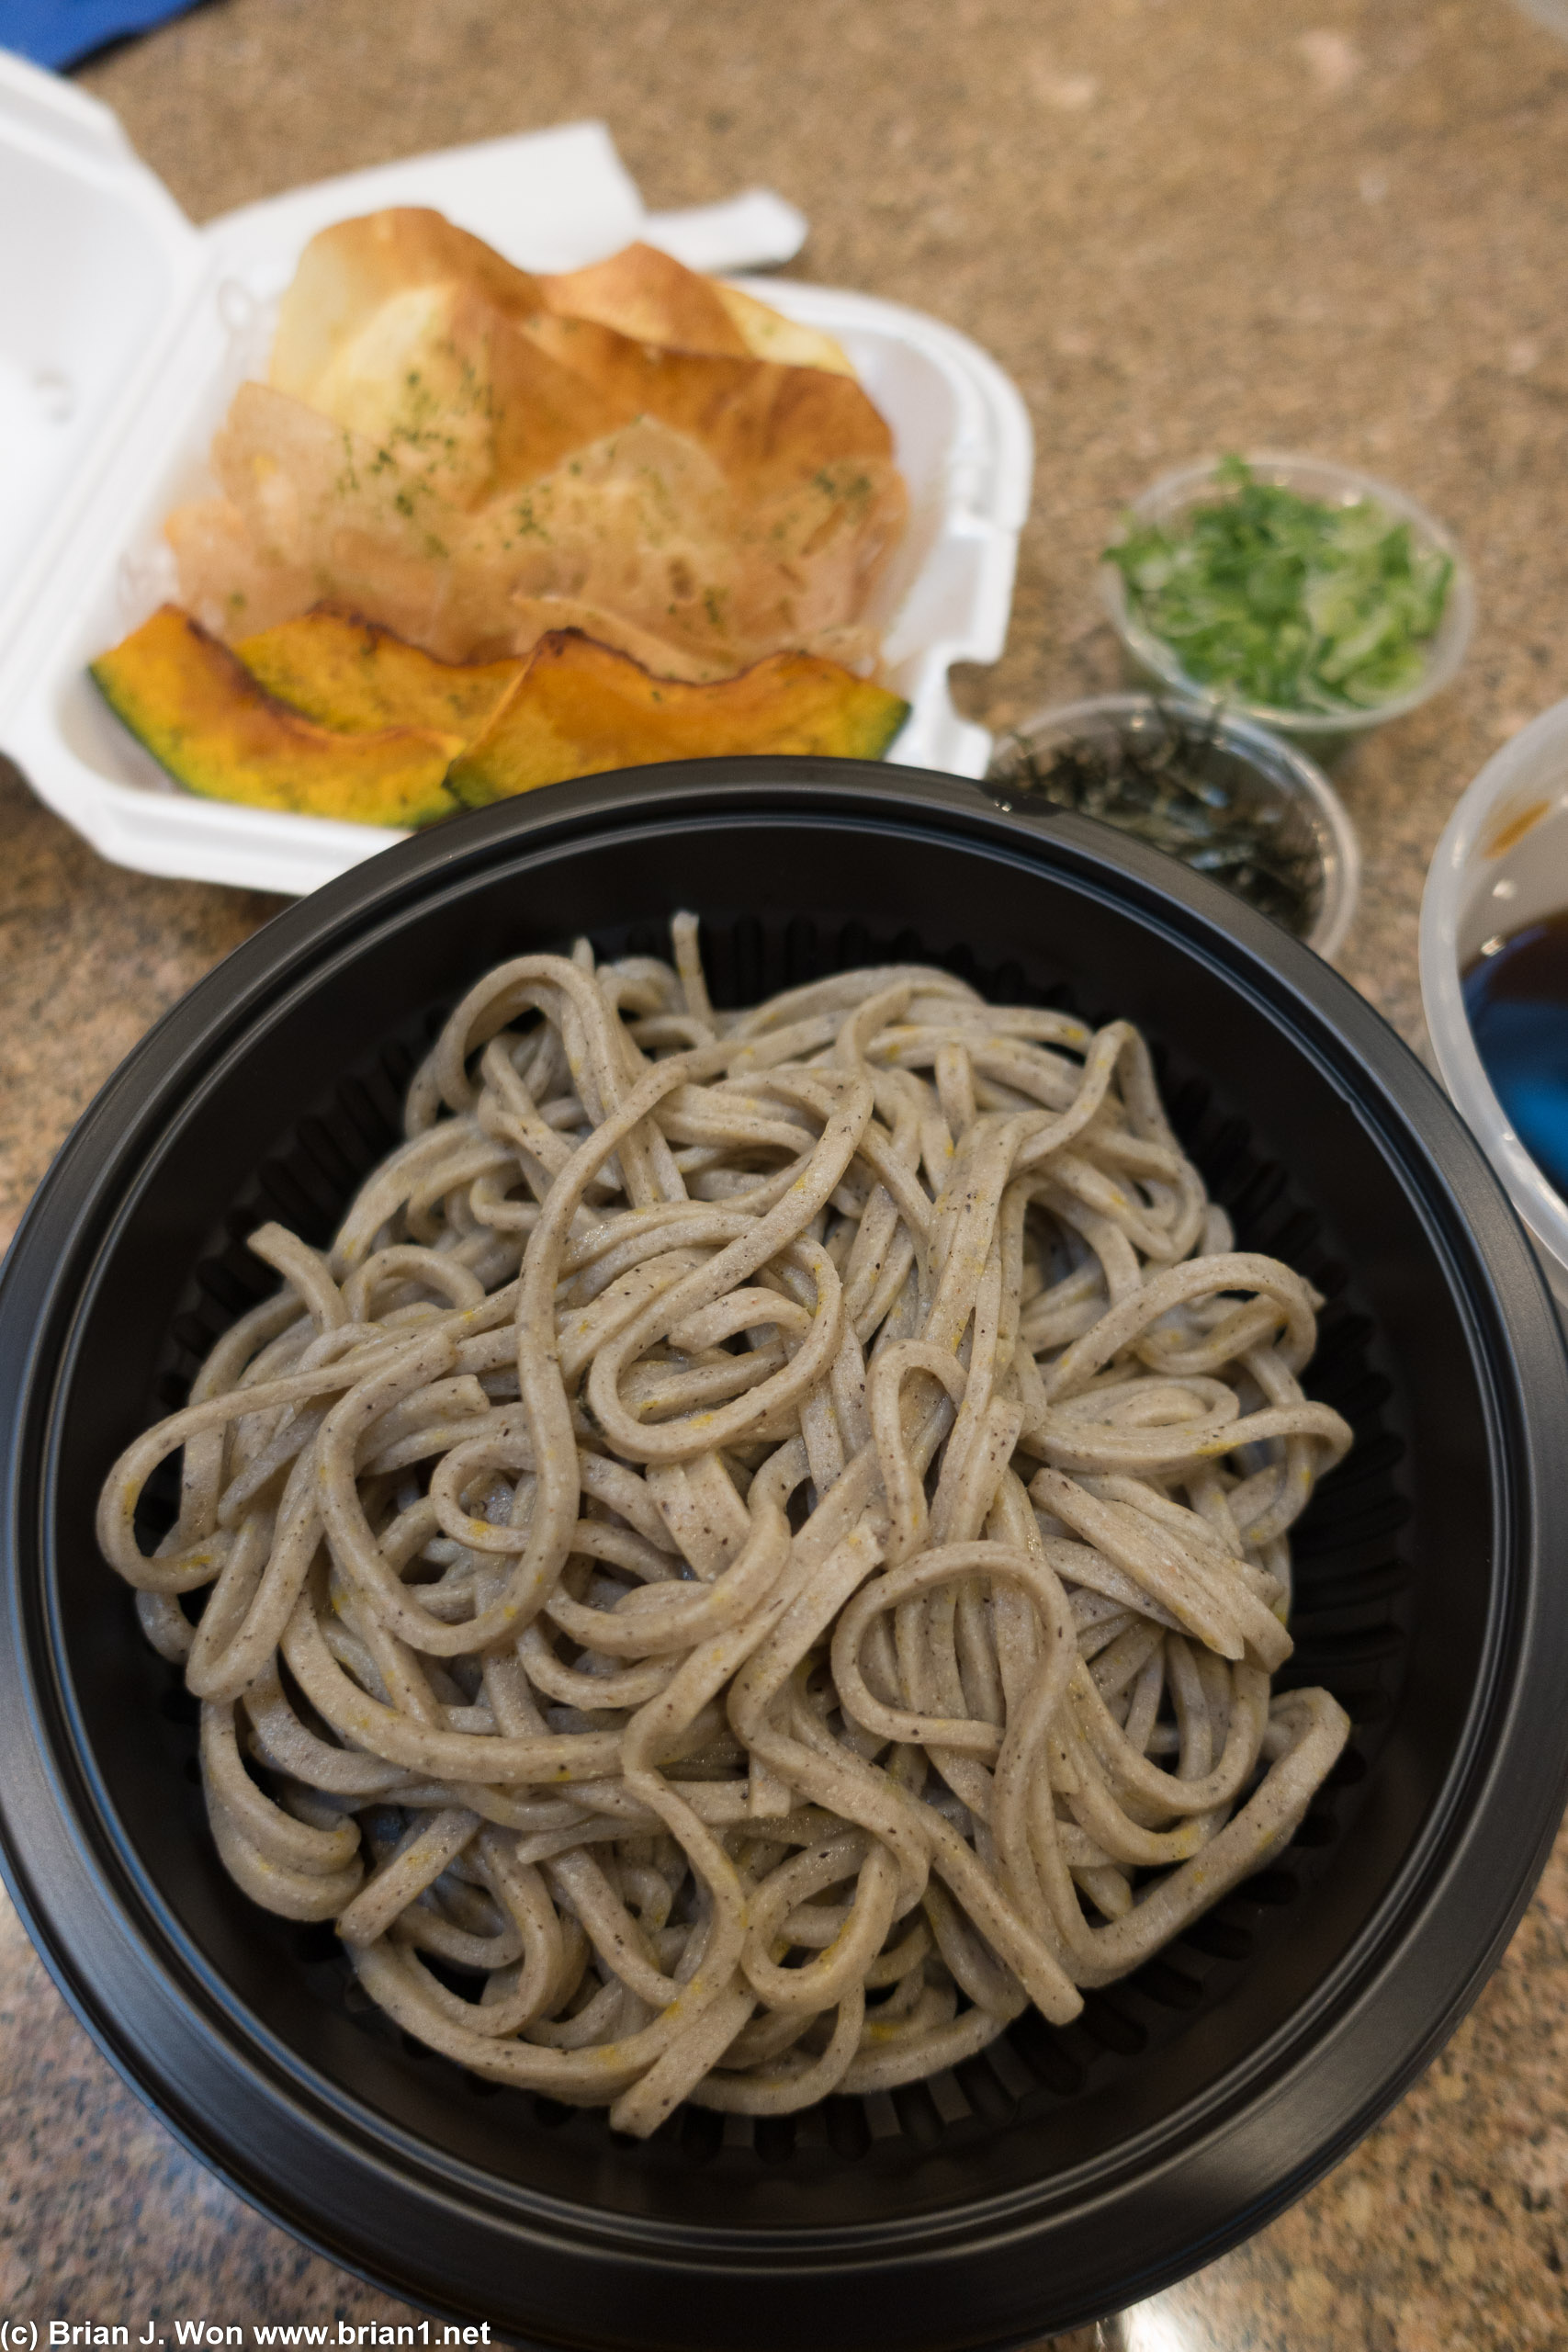 Ample portion of soba.